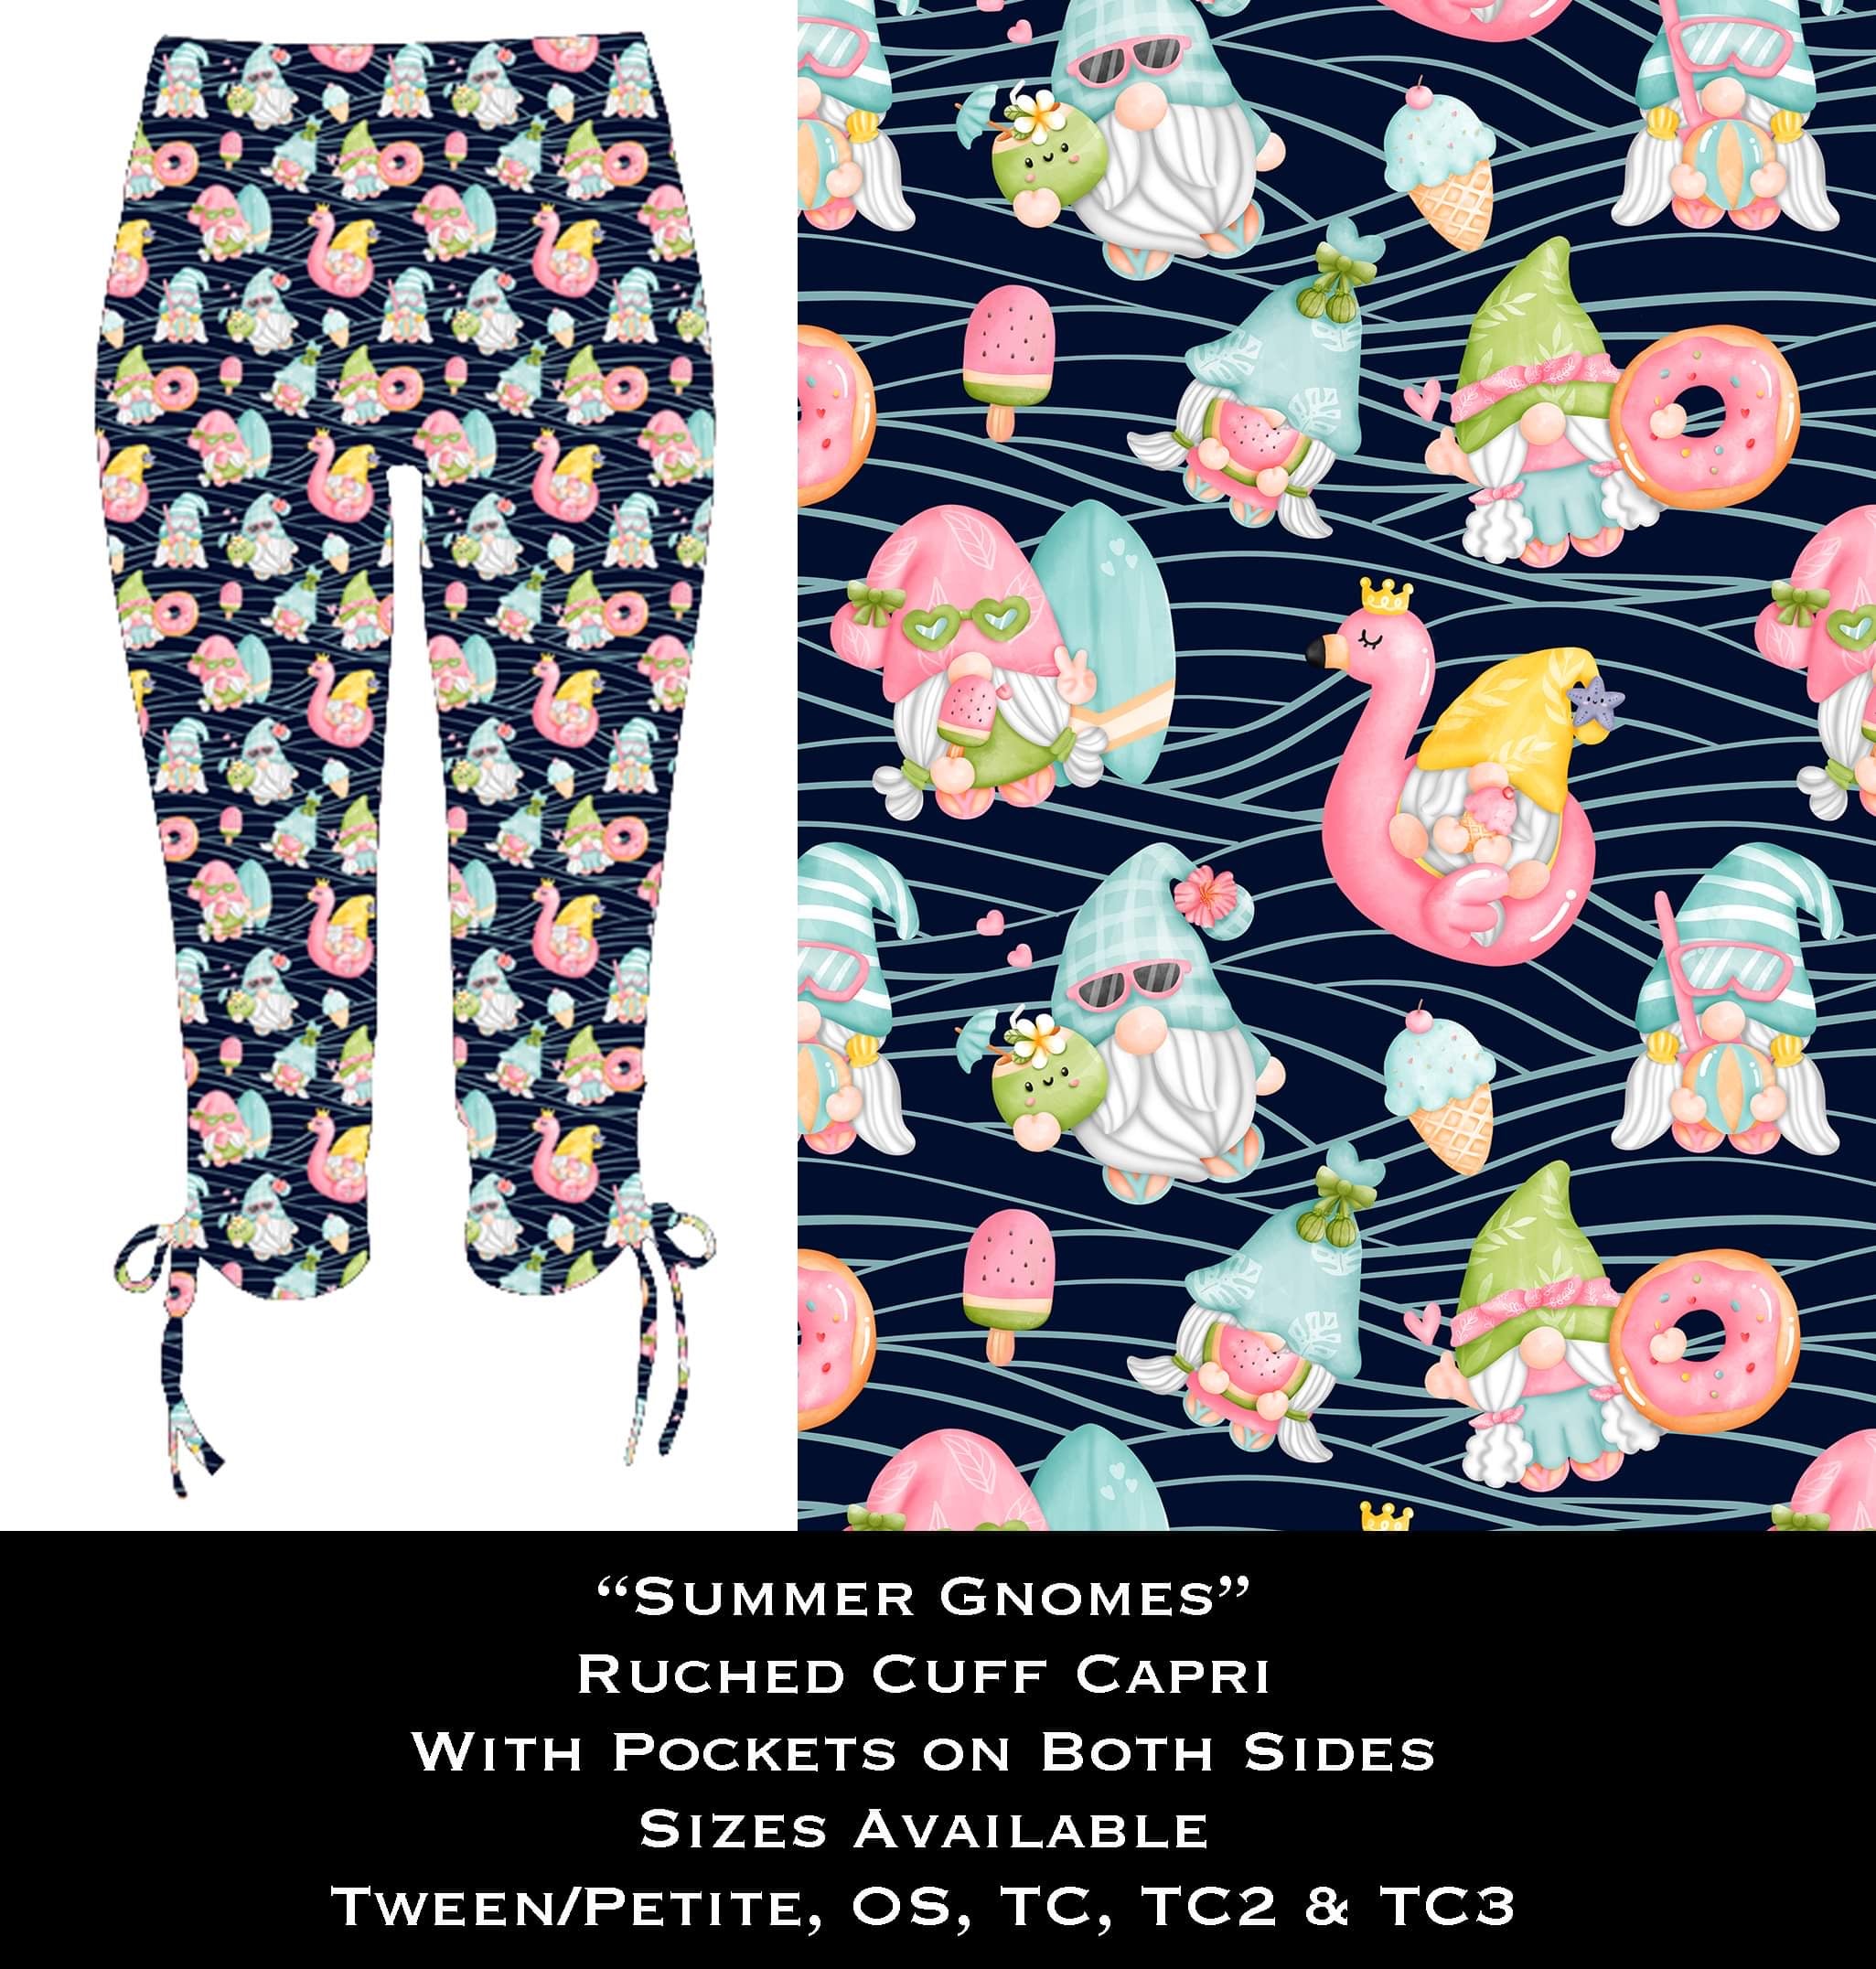 Summer Gnomes Ruched Cuff Capris with Side Pockets